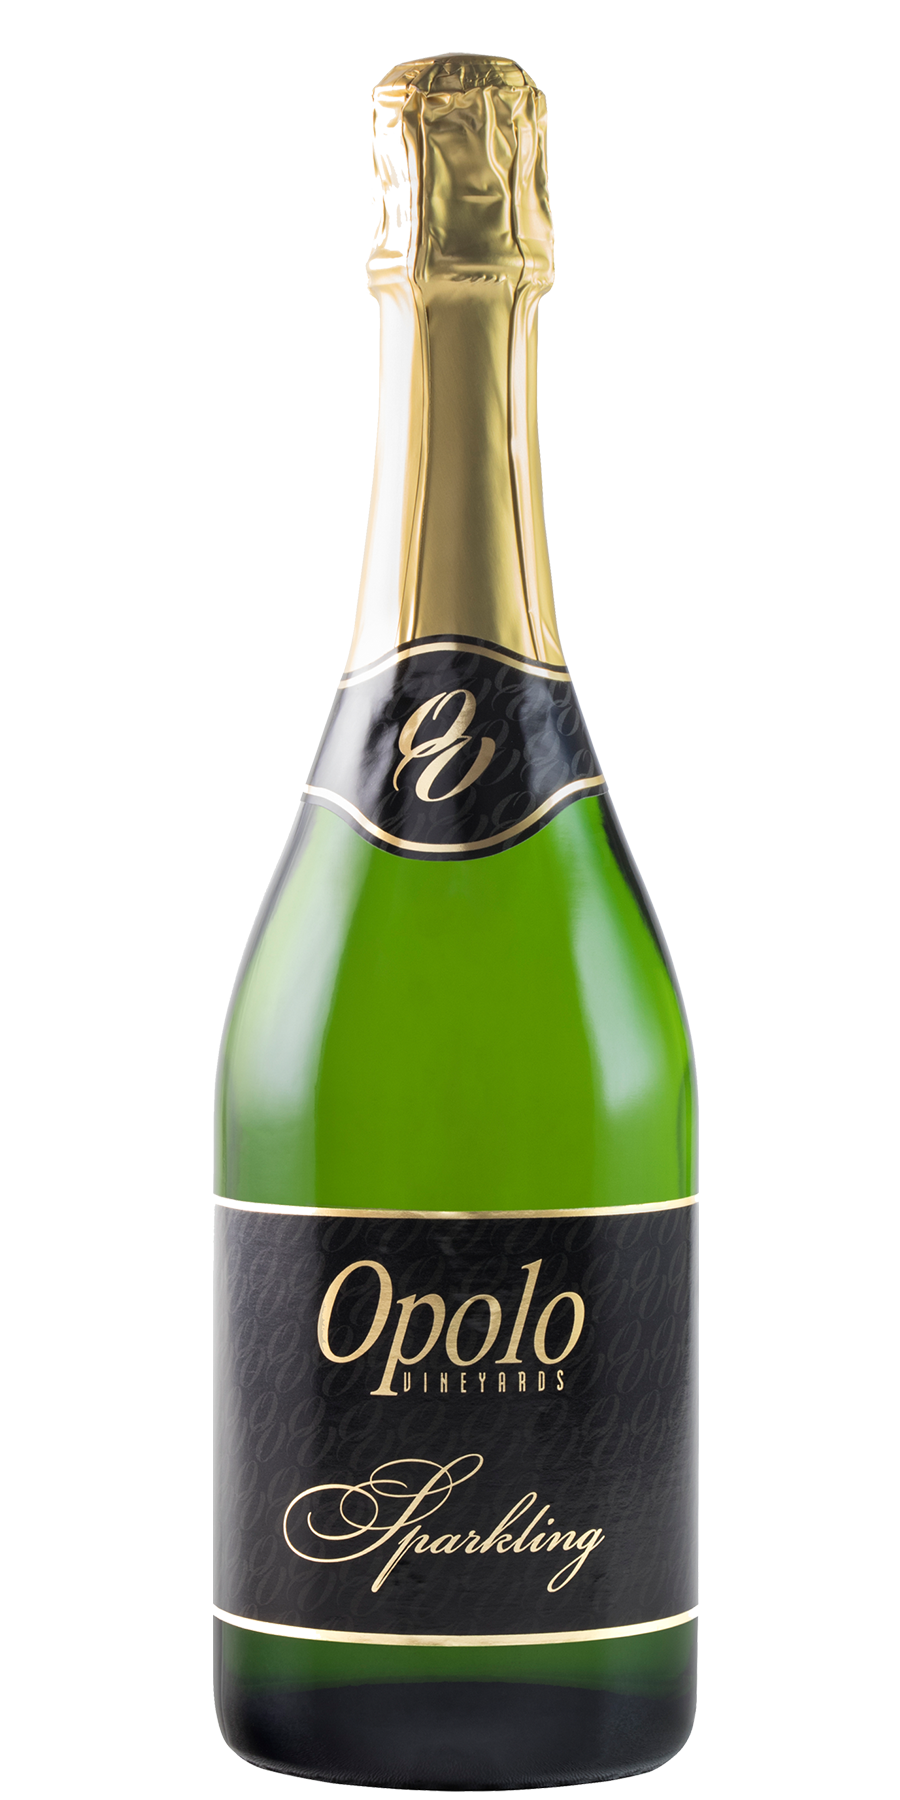 Bottle of Opolo Sparkling wine